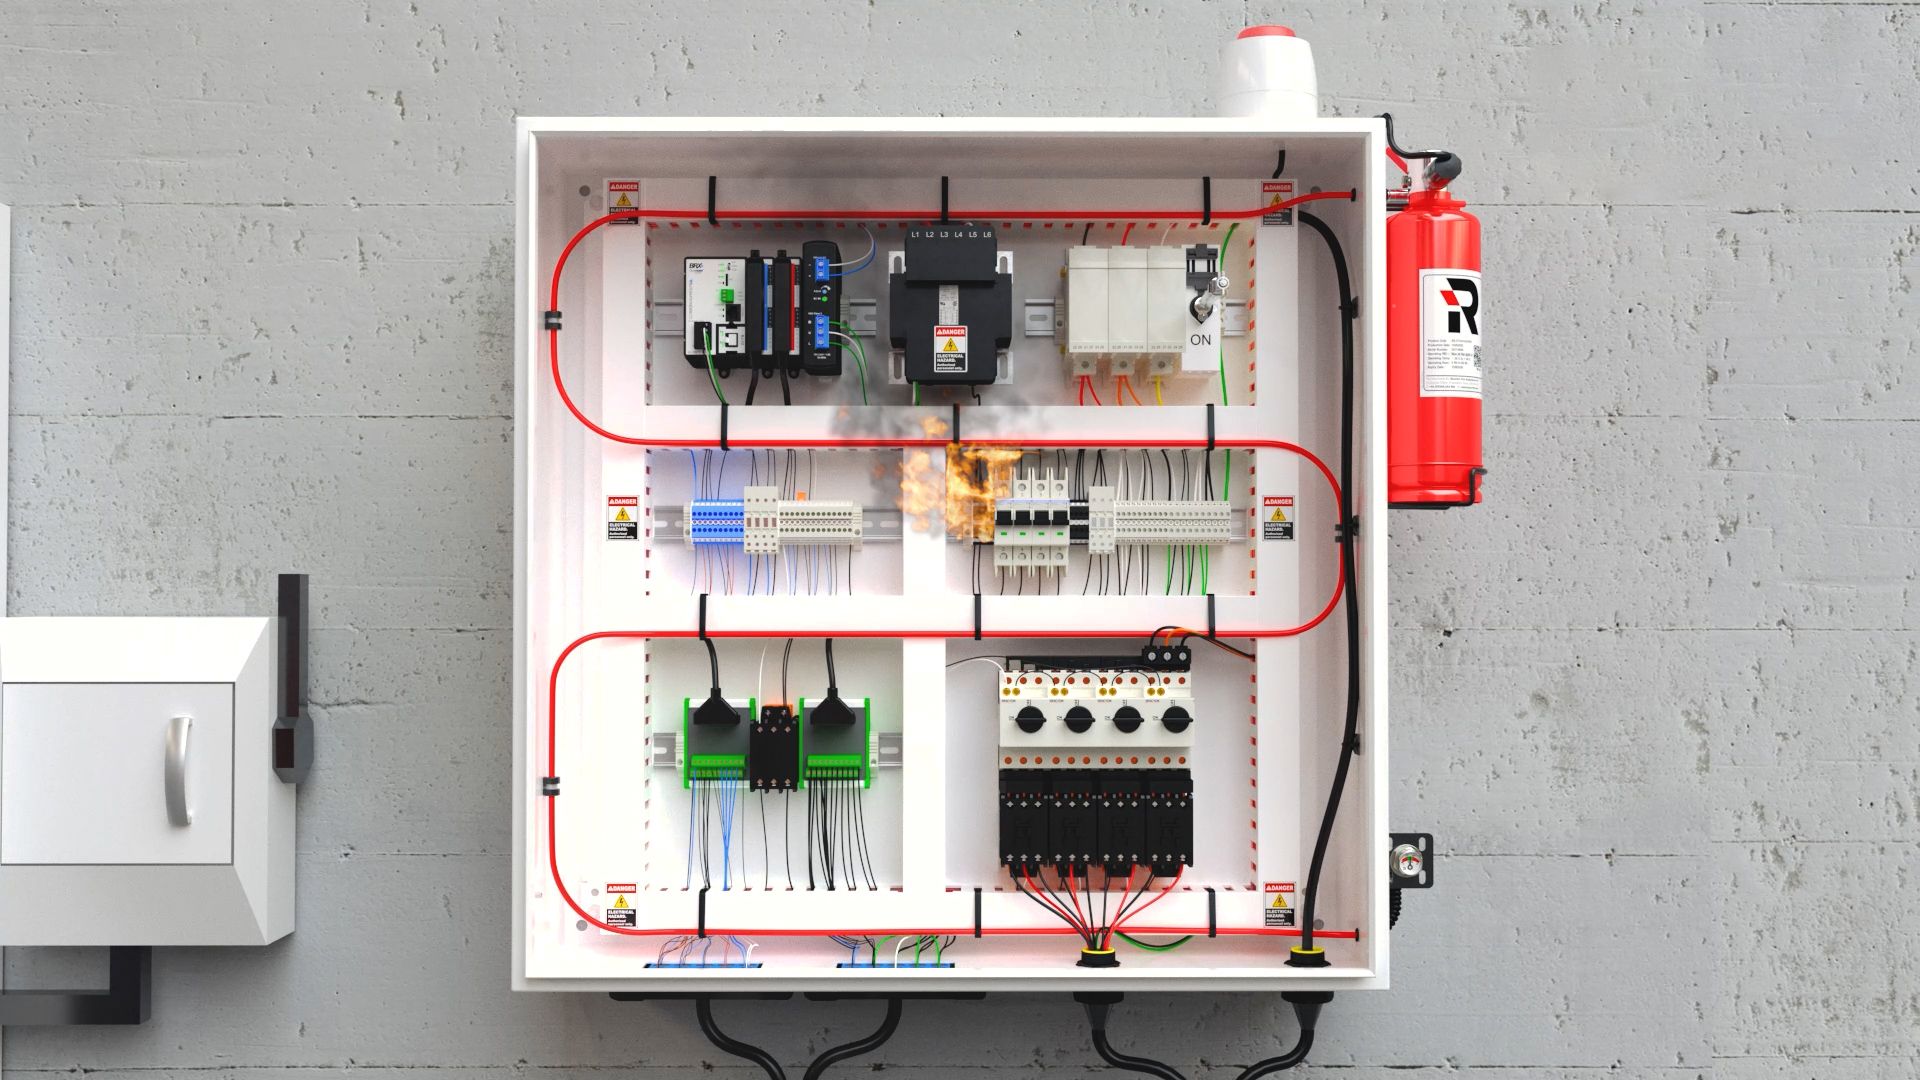 Clean Agent Reacton Fire Suppression System for Electrical Panels